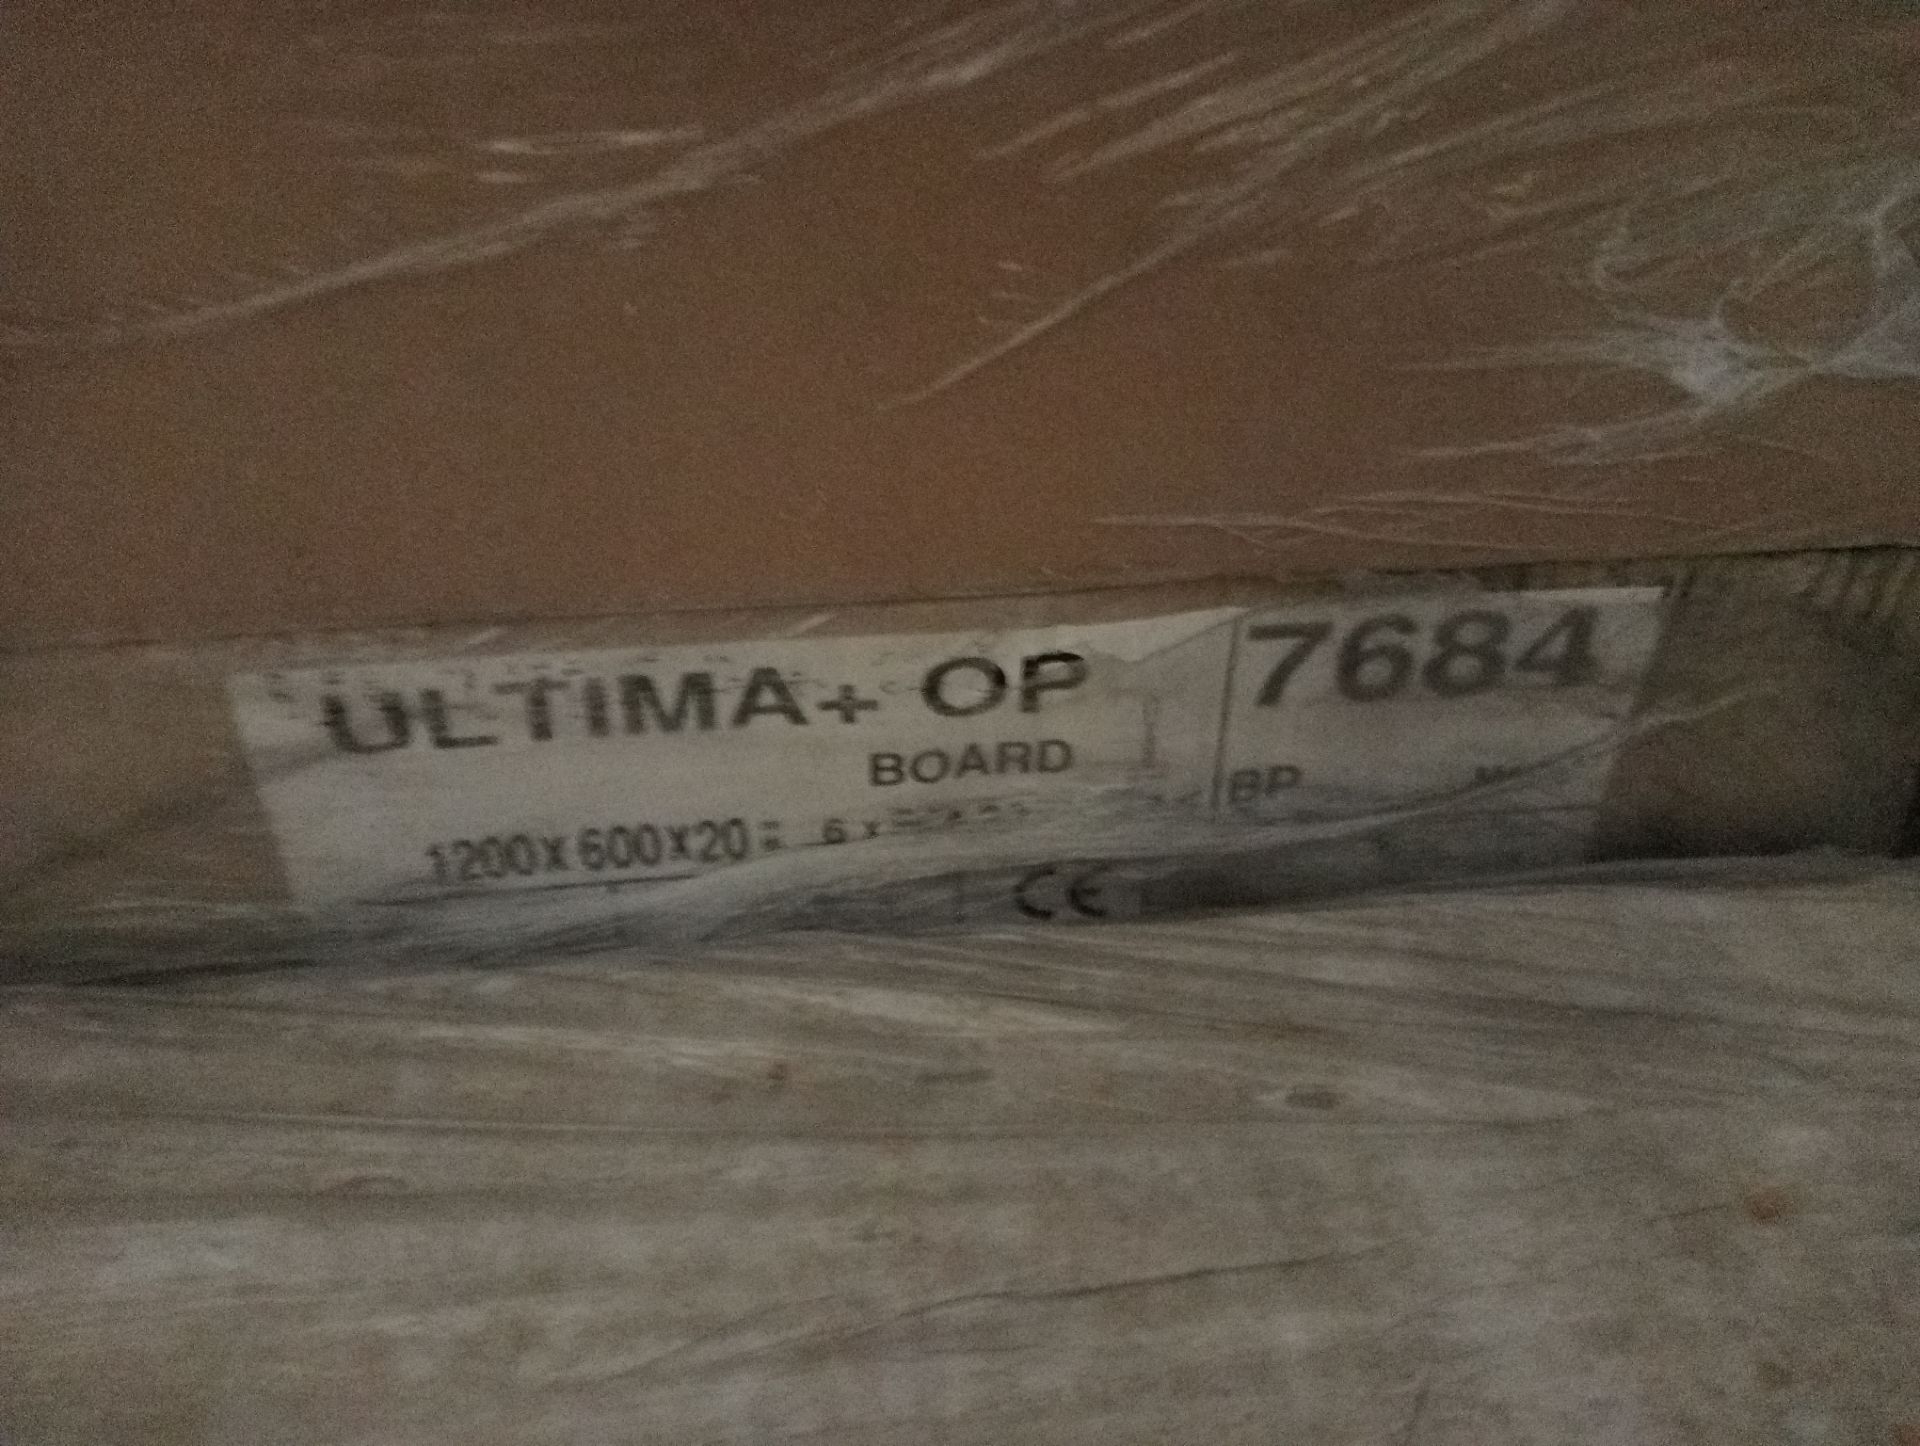 JOBLOT OF 12 X ULTIMA+ OP BOARD CEILING TILES 7684 AND 7663 RRP £2500 - Image 4 of 4